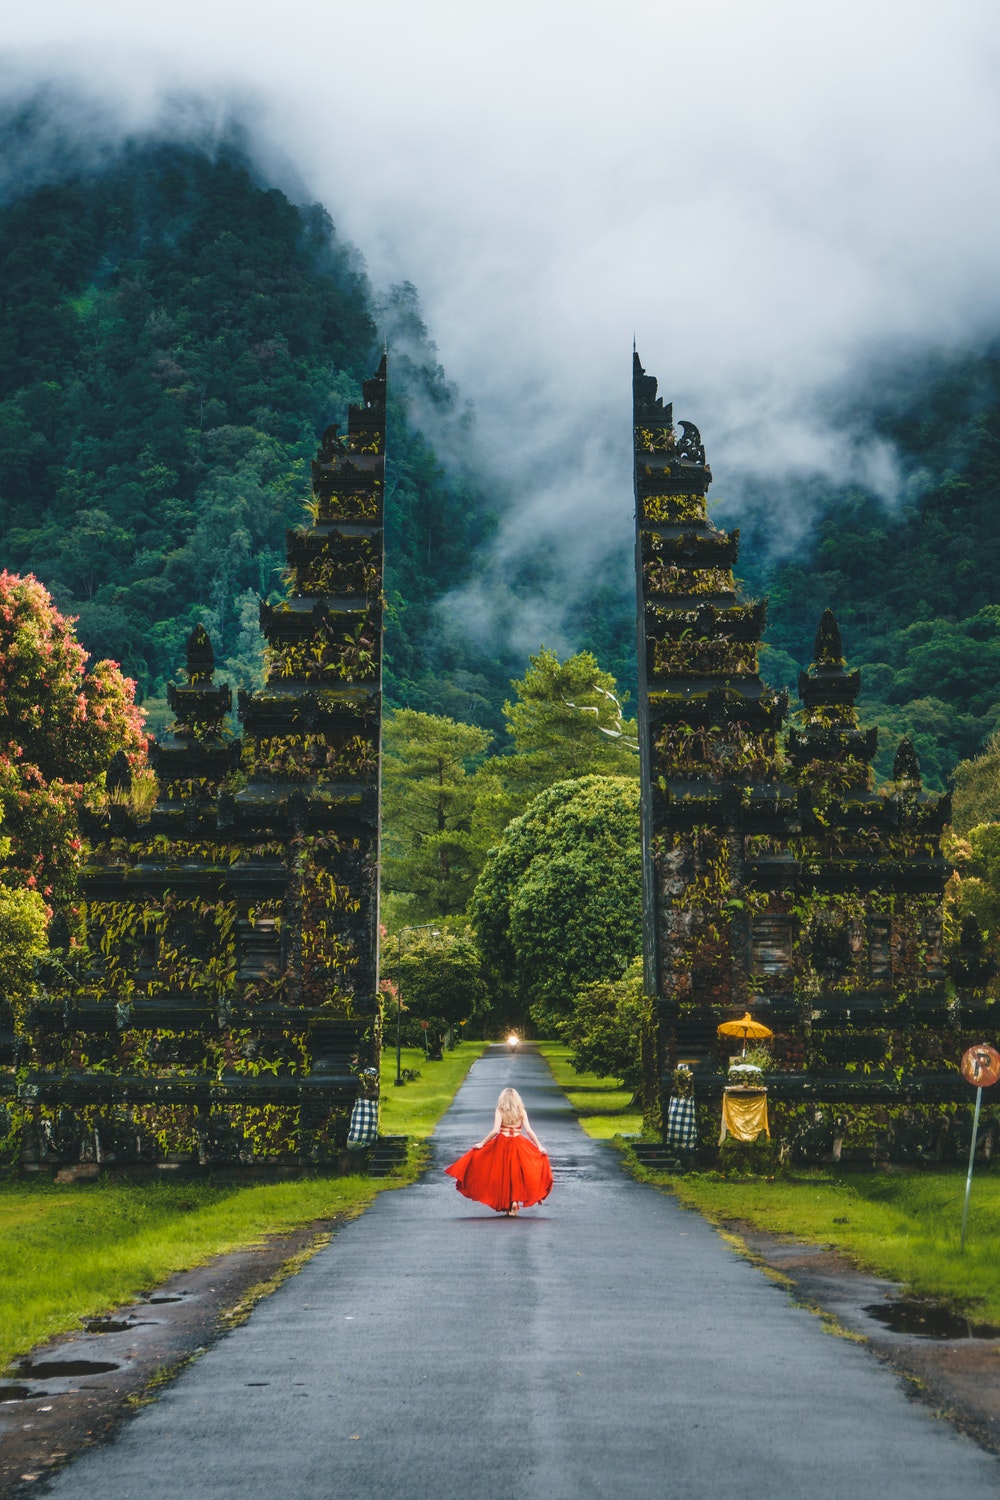 Top Ways of Dealing With Anxiety Whilst Travelling Abroad in 2019 - Stress free. Gates in Bali Indonesia